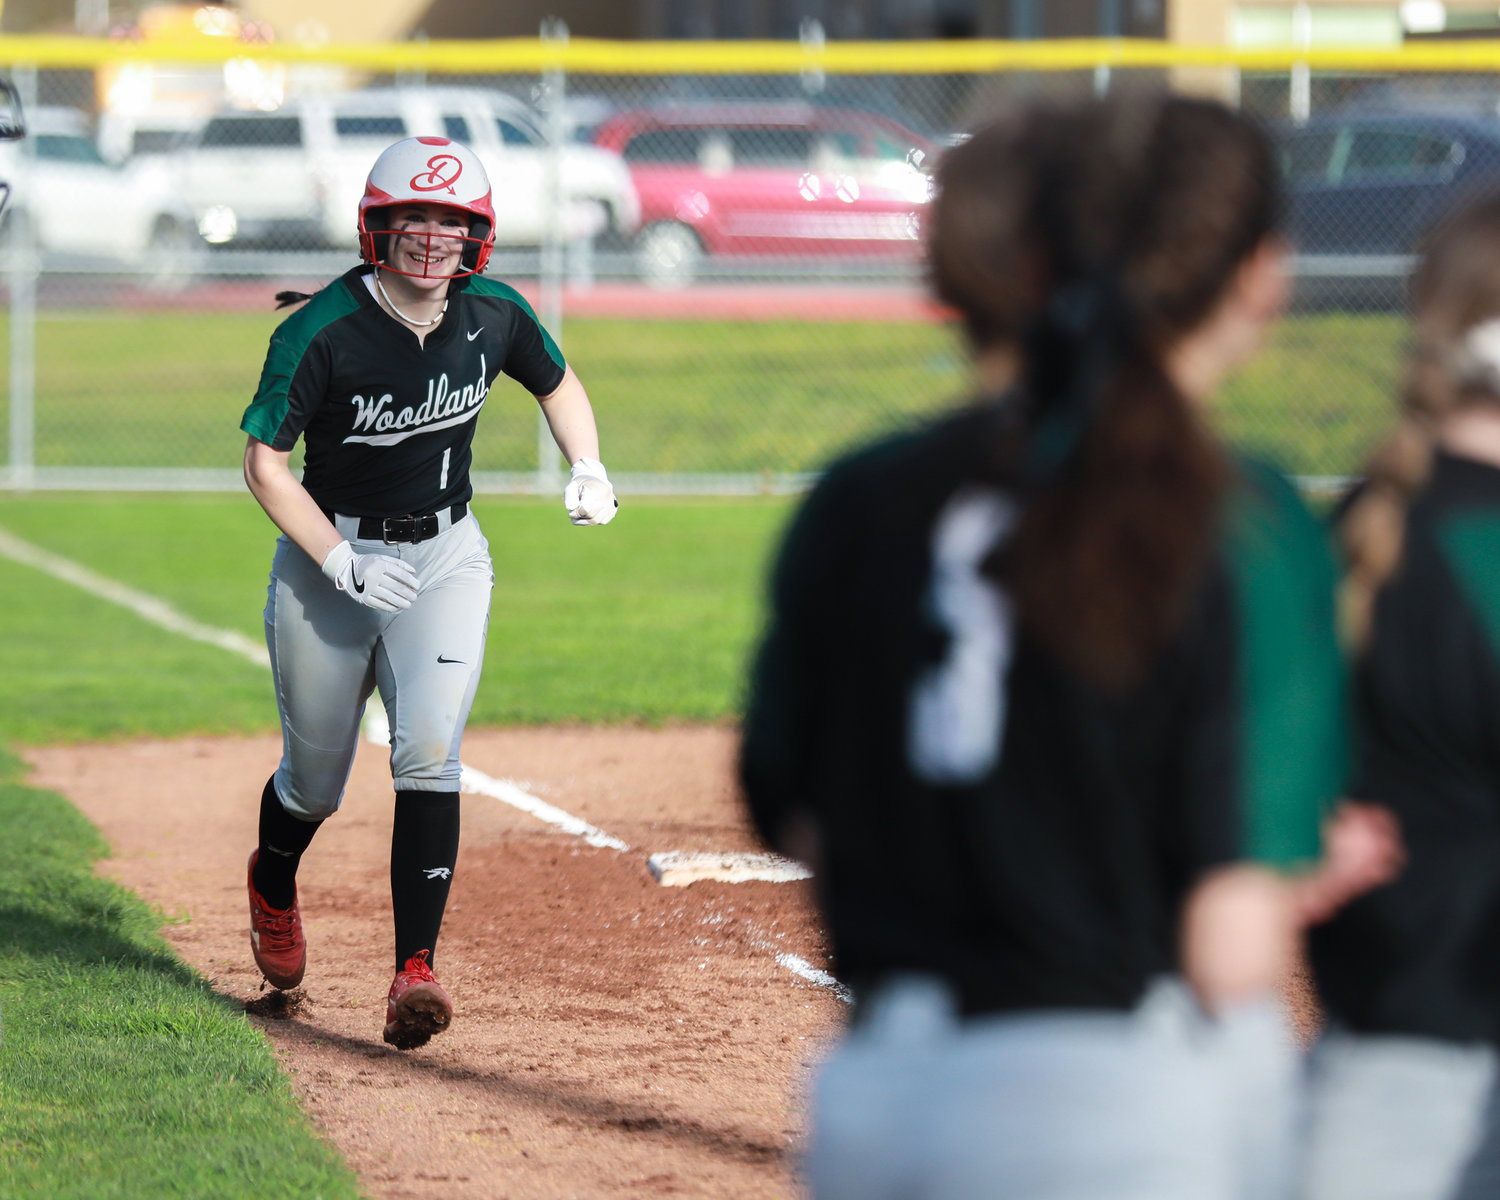 Woodland's Ainseligh Utter jogs to home plate after hitting a home run in a game against Kelso on Wednesday, March 29.